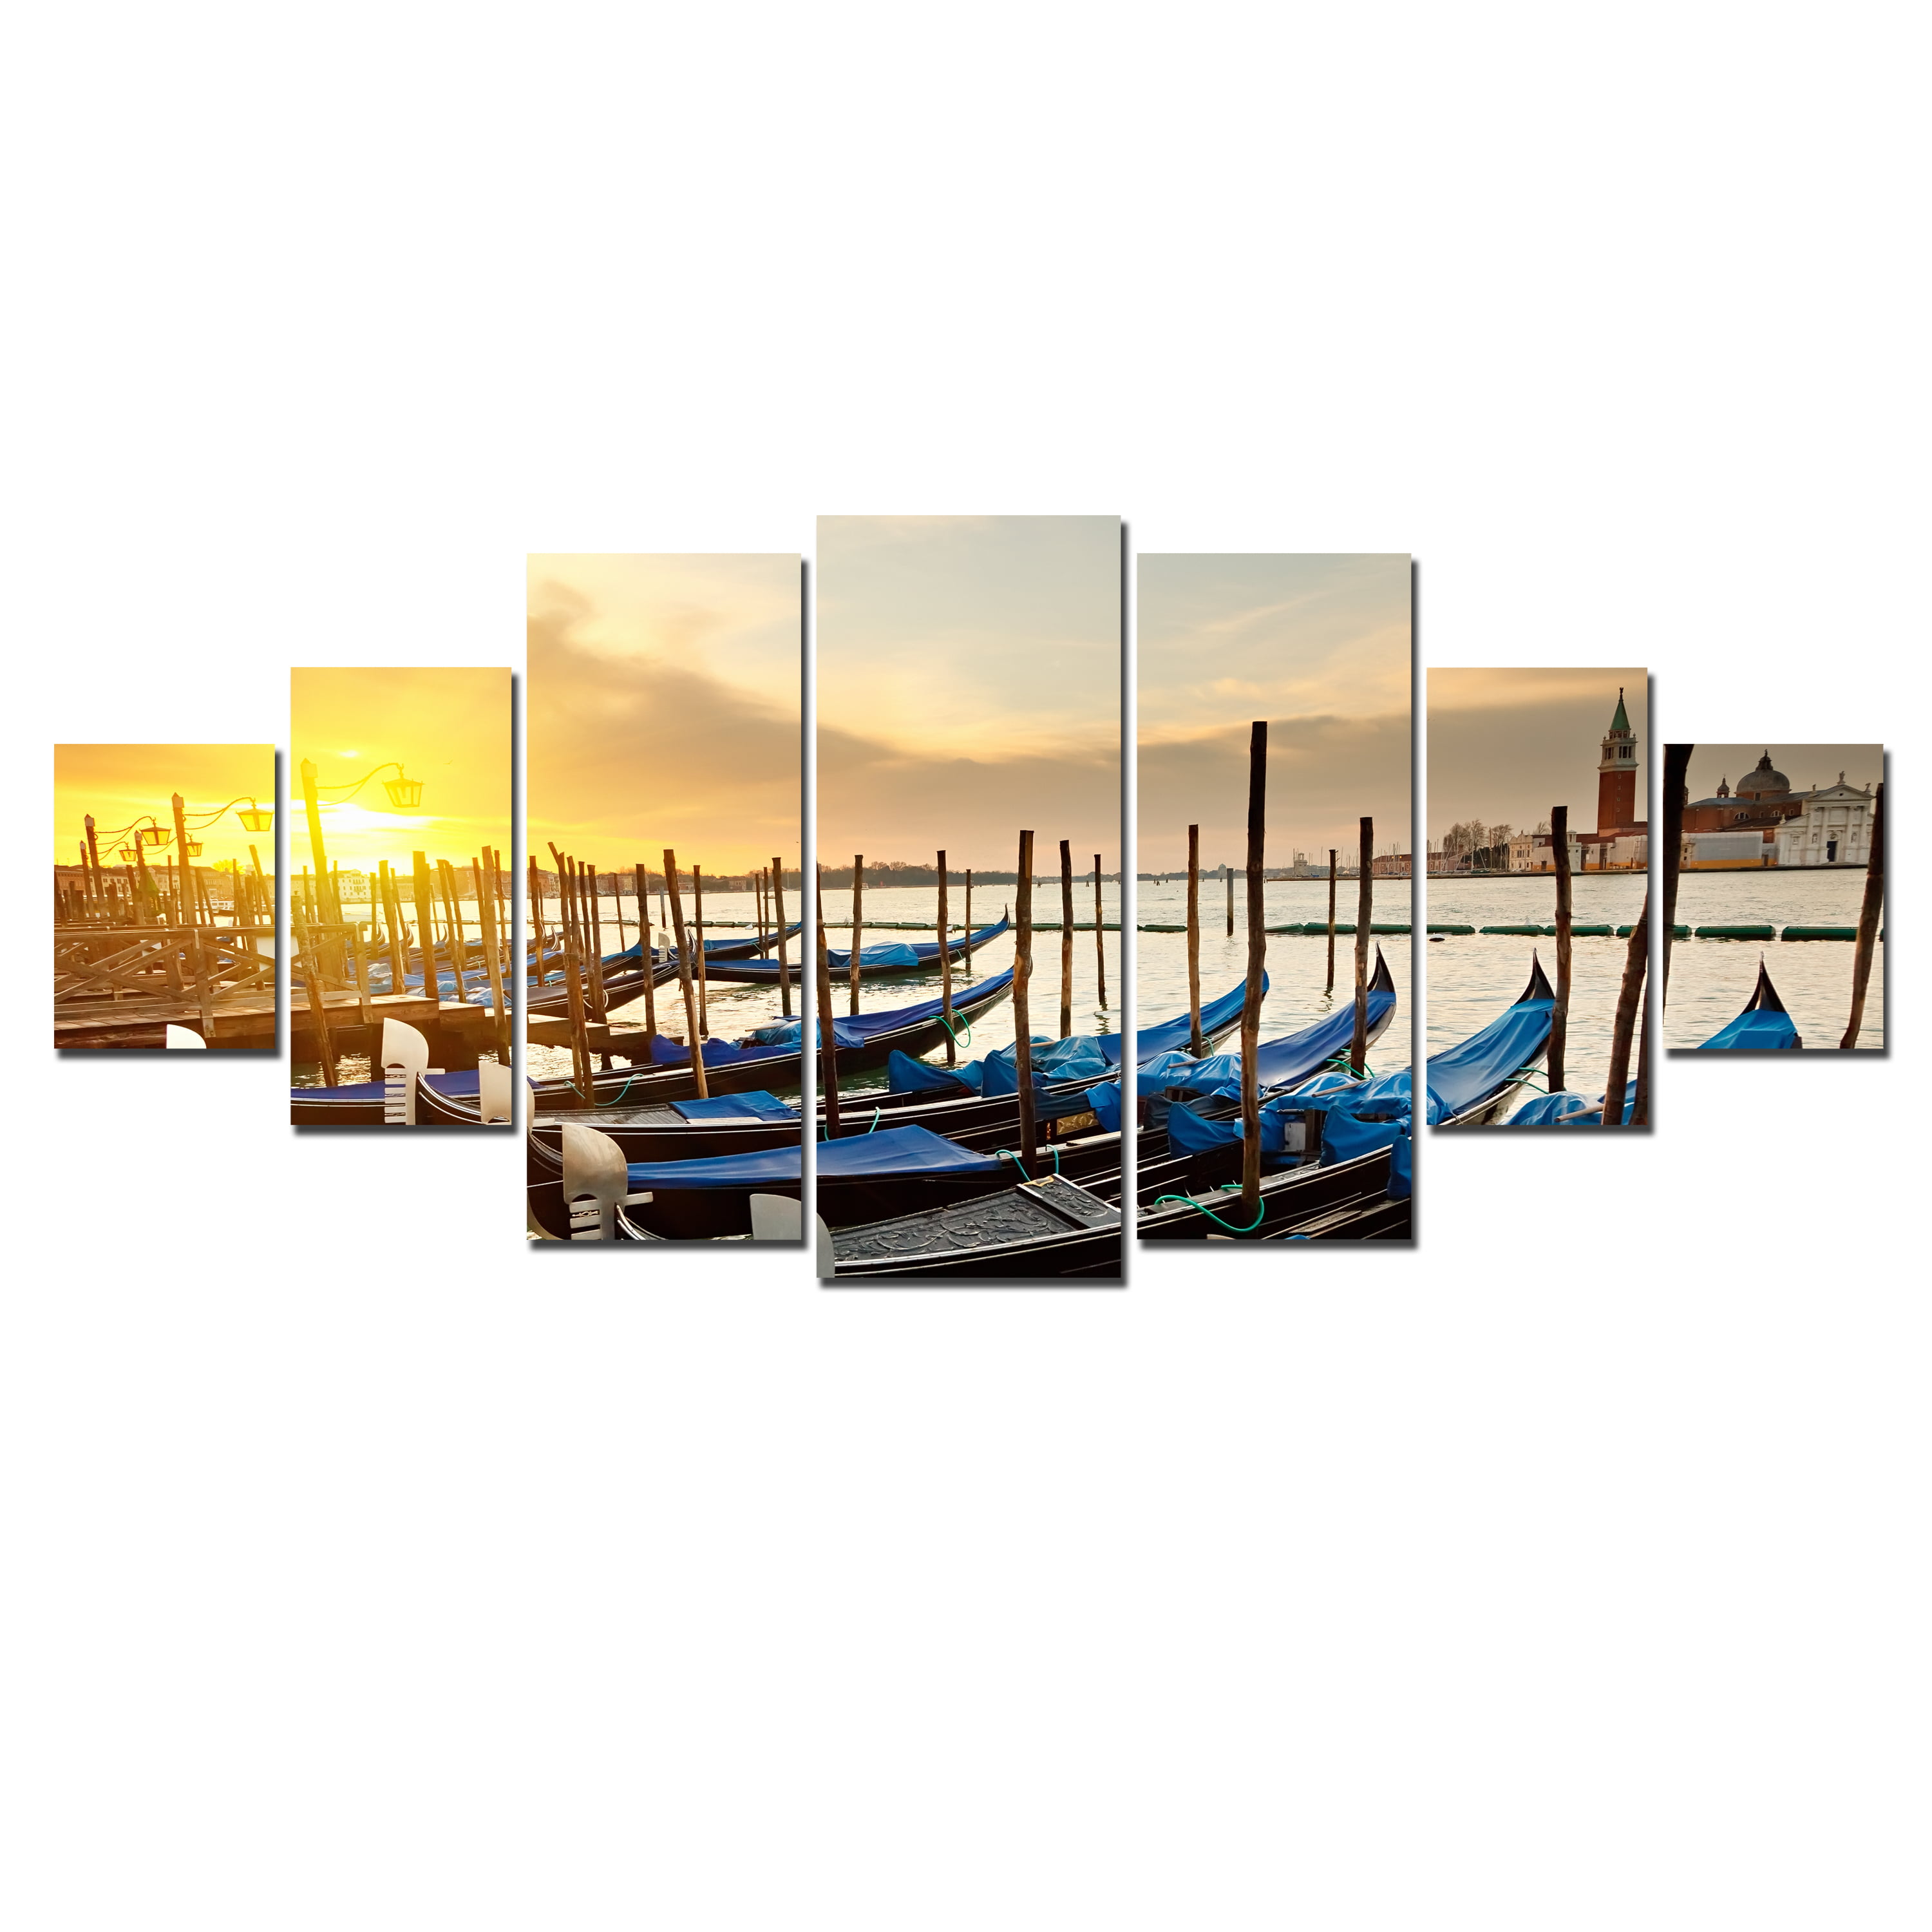 Startonight Huge Canvas Wall Art Boats On The Shore, USA Large Home ...